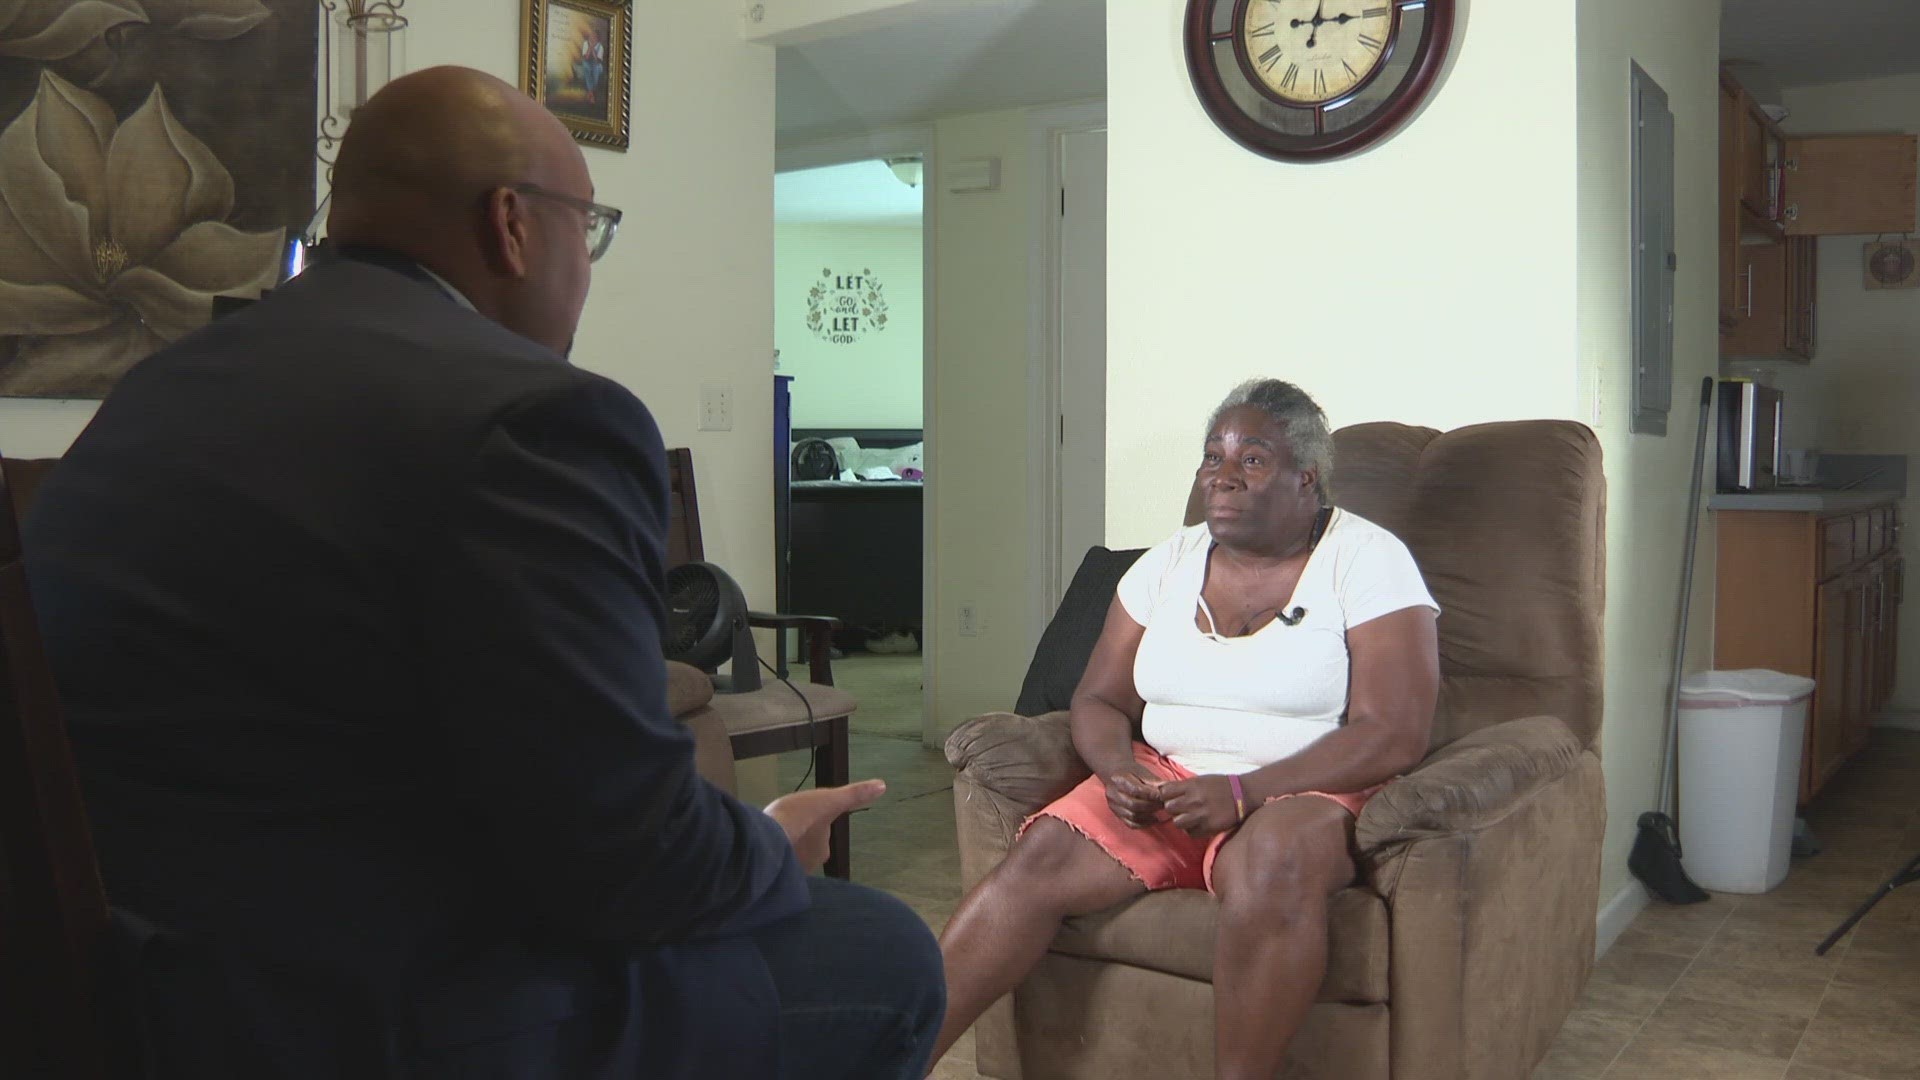 After we interviewed Carol Russell, her air conditioner was replaced the next day. Rep. Angie Nixon says she is considering filing legislation to protect tenants.